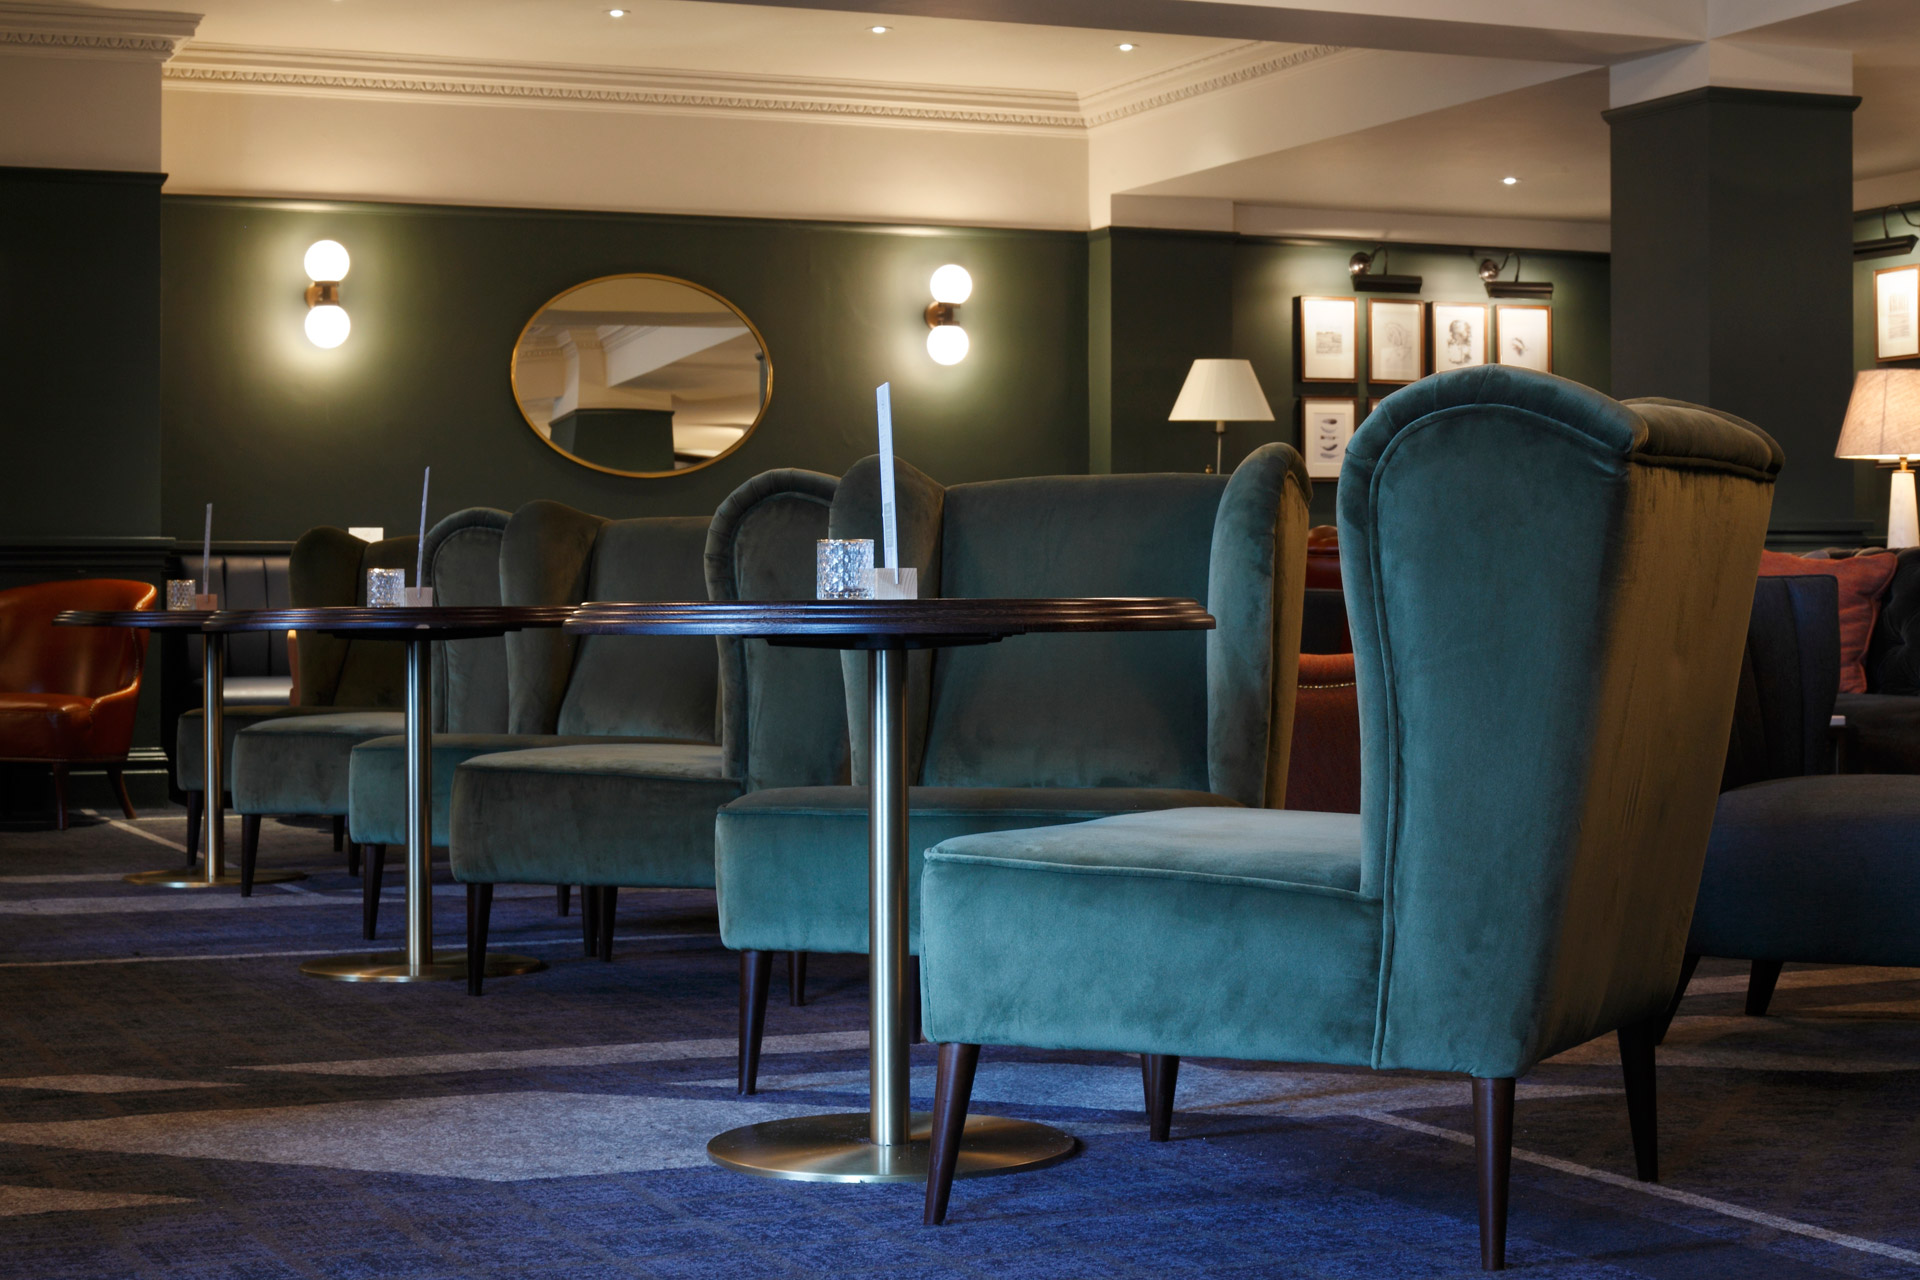 Bespoke light fixtures add to the relaxed atmosphere at the Hilton Puckrup Hall